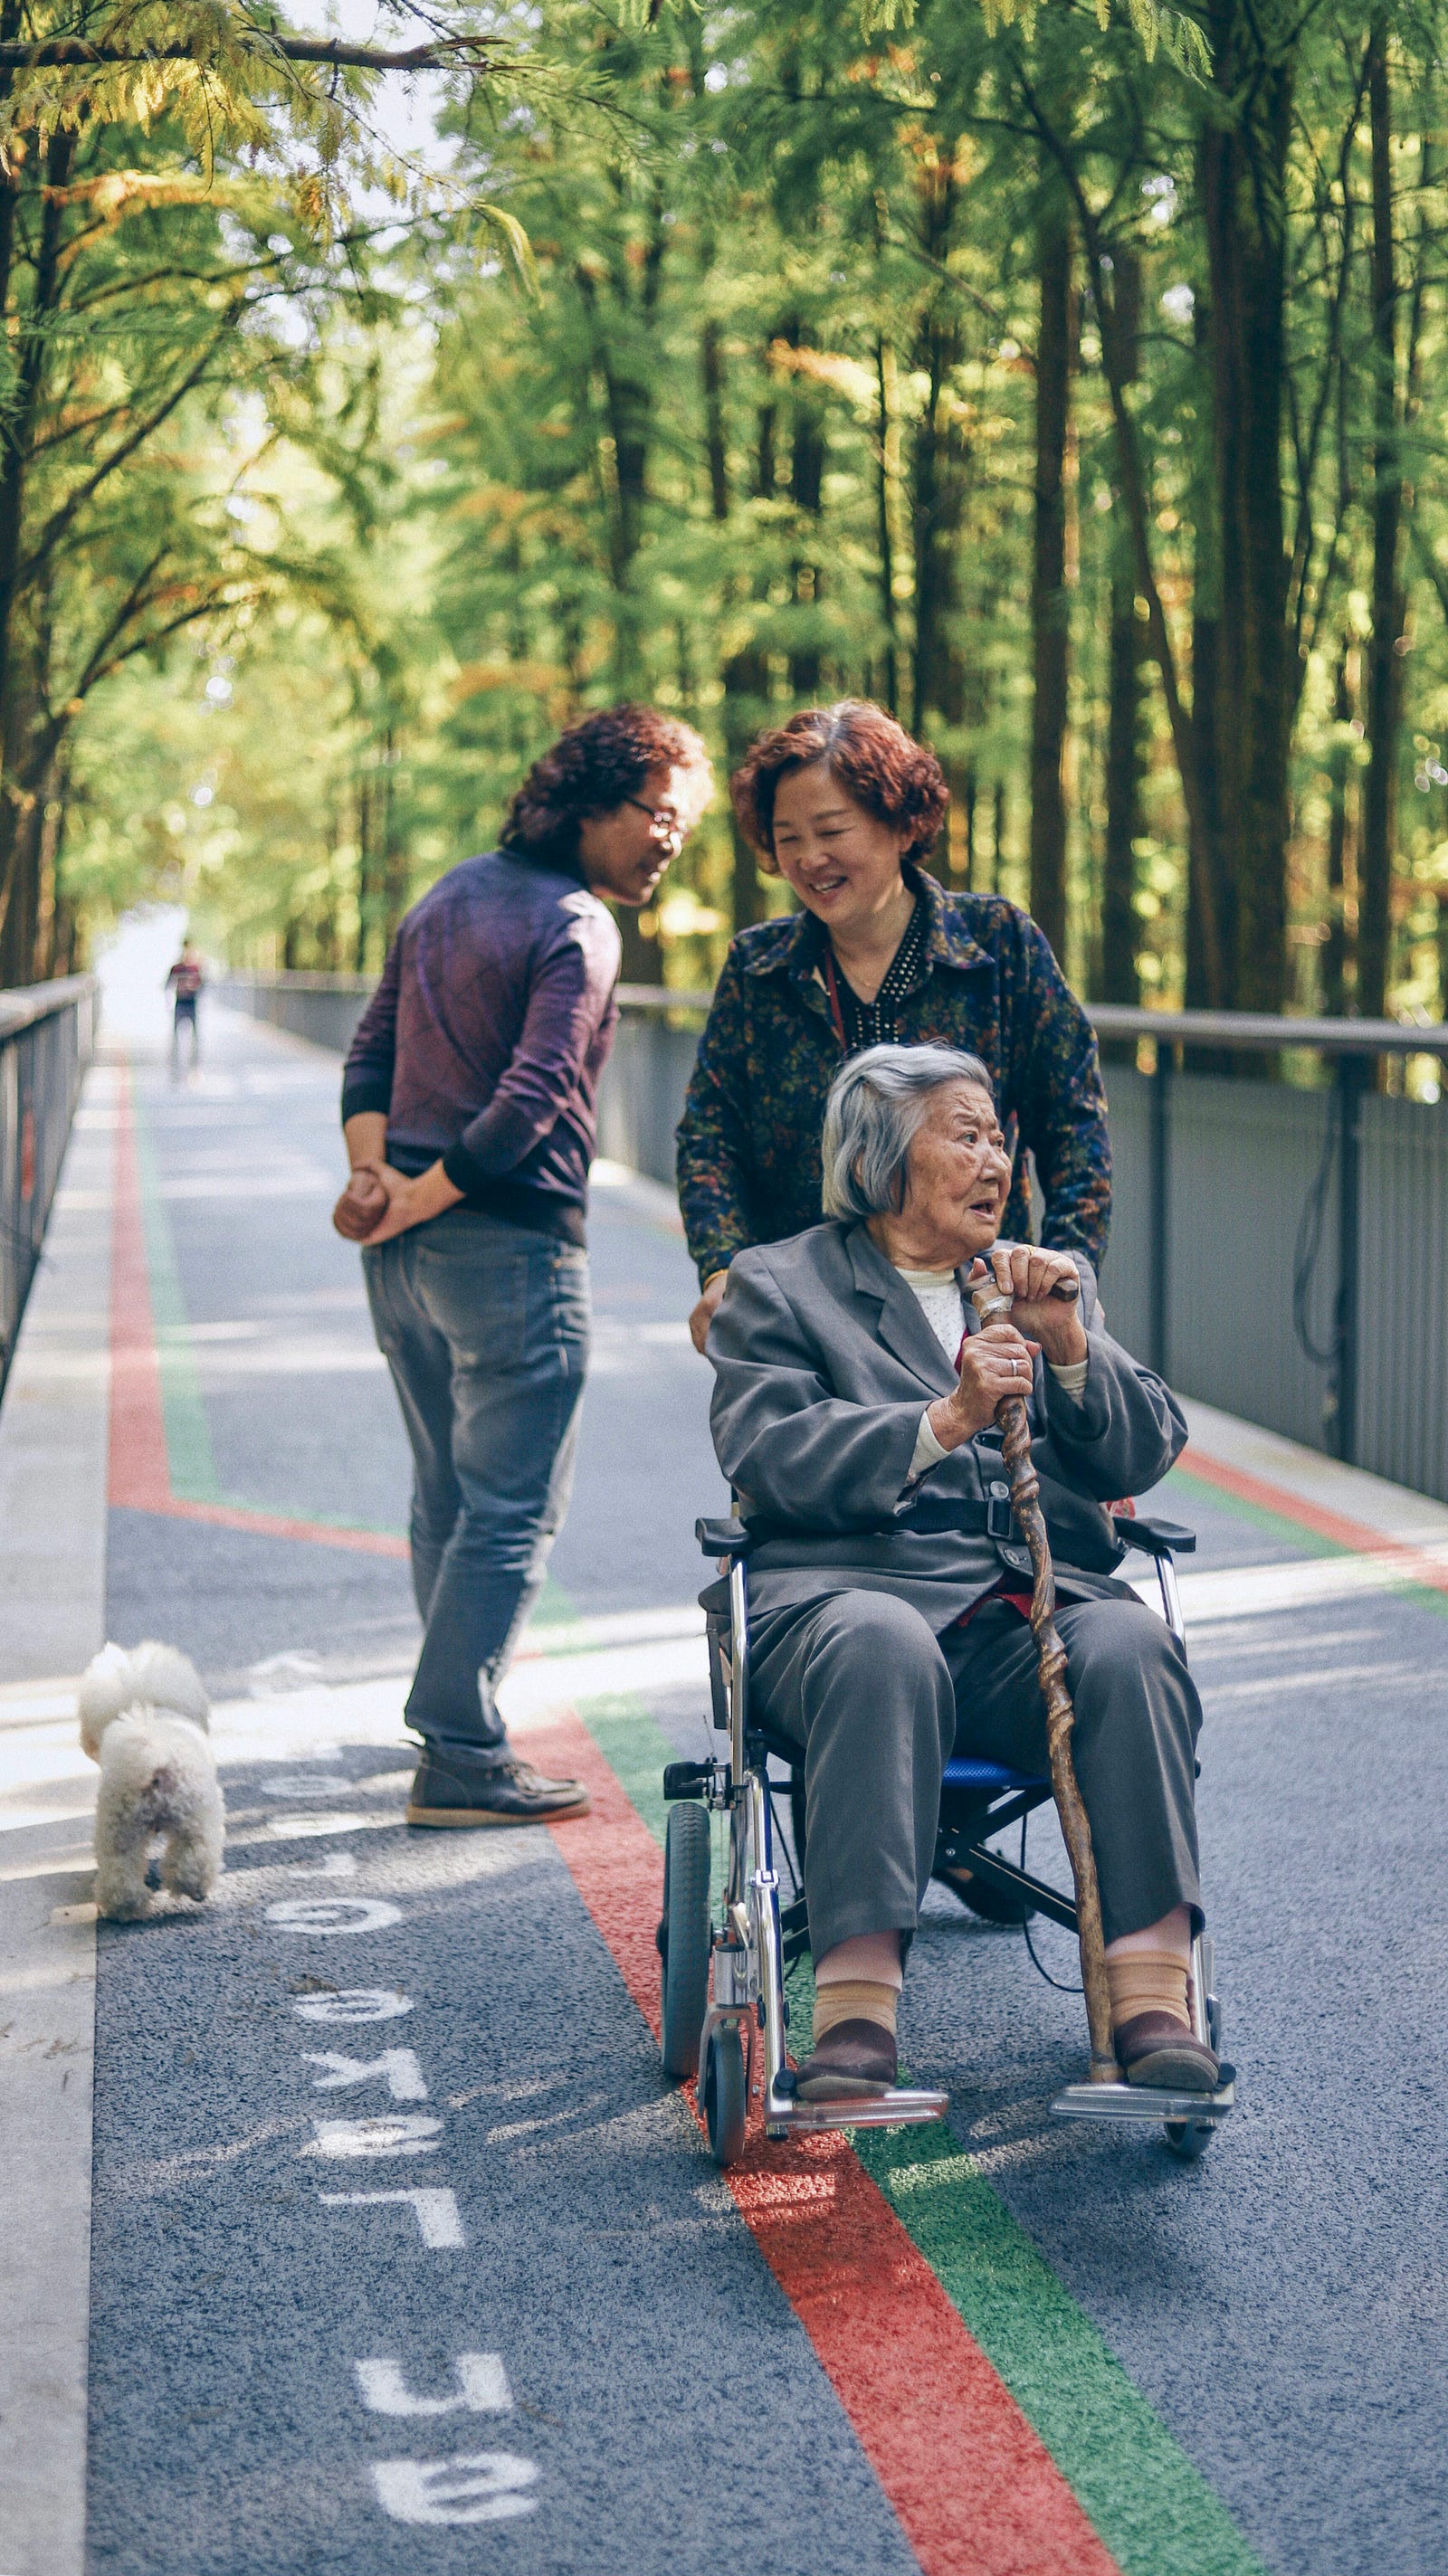 A frail Asian woman sits in a wheelchair, with two younger individuals immediately behind her.